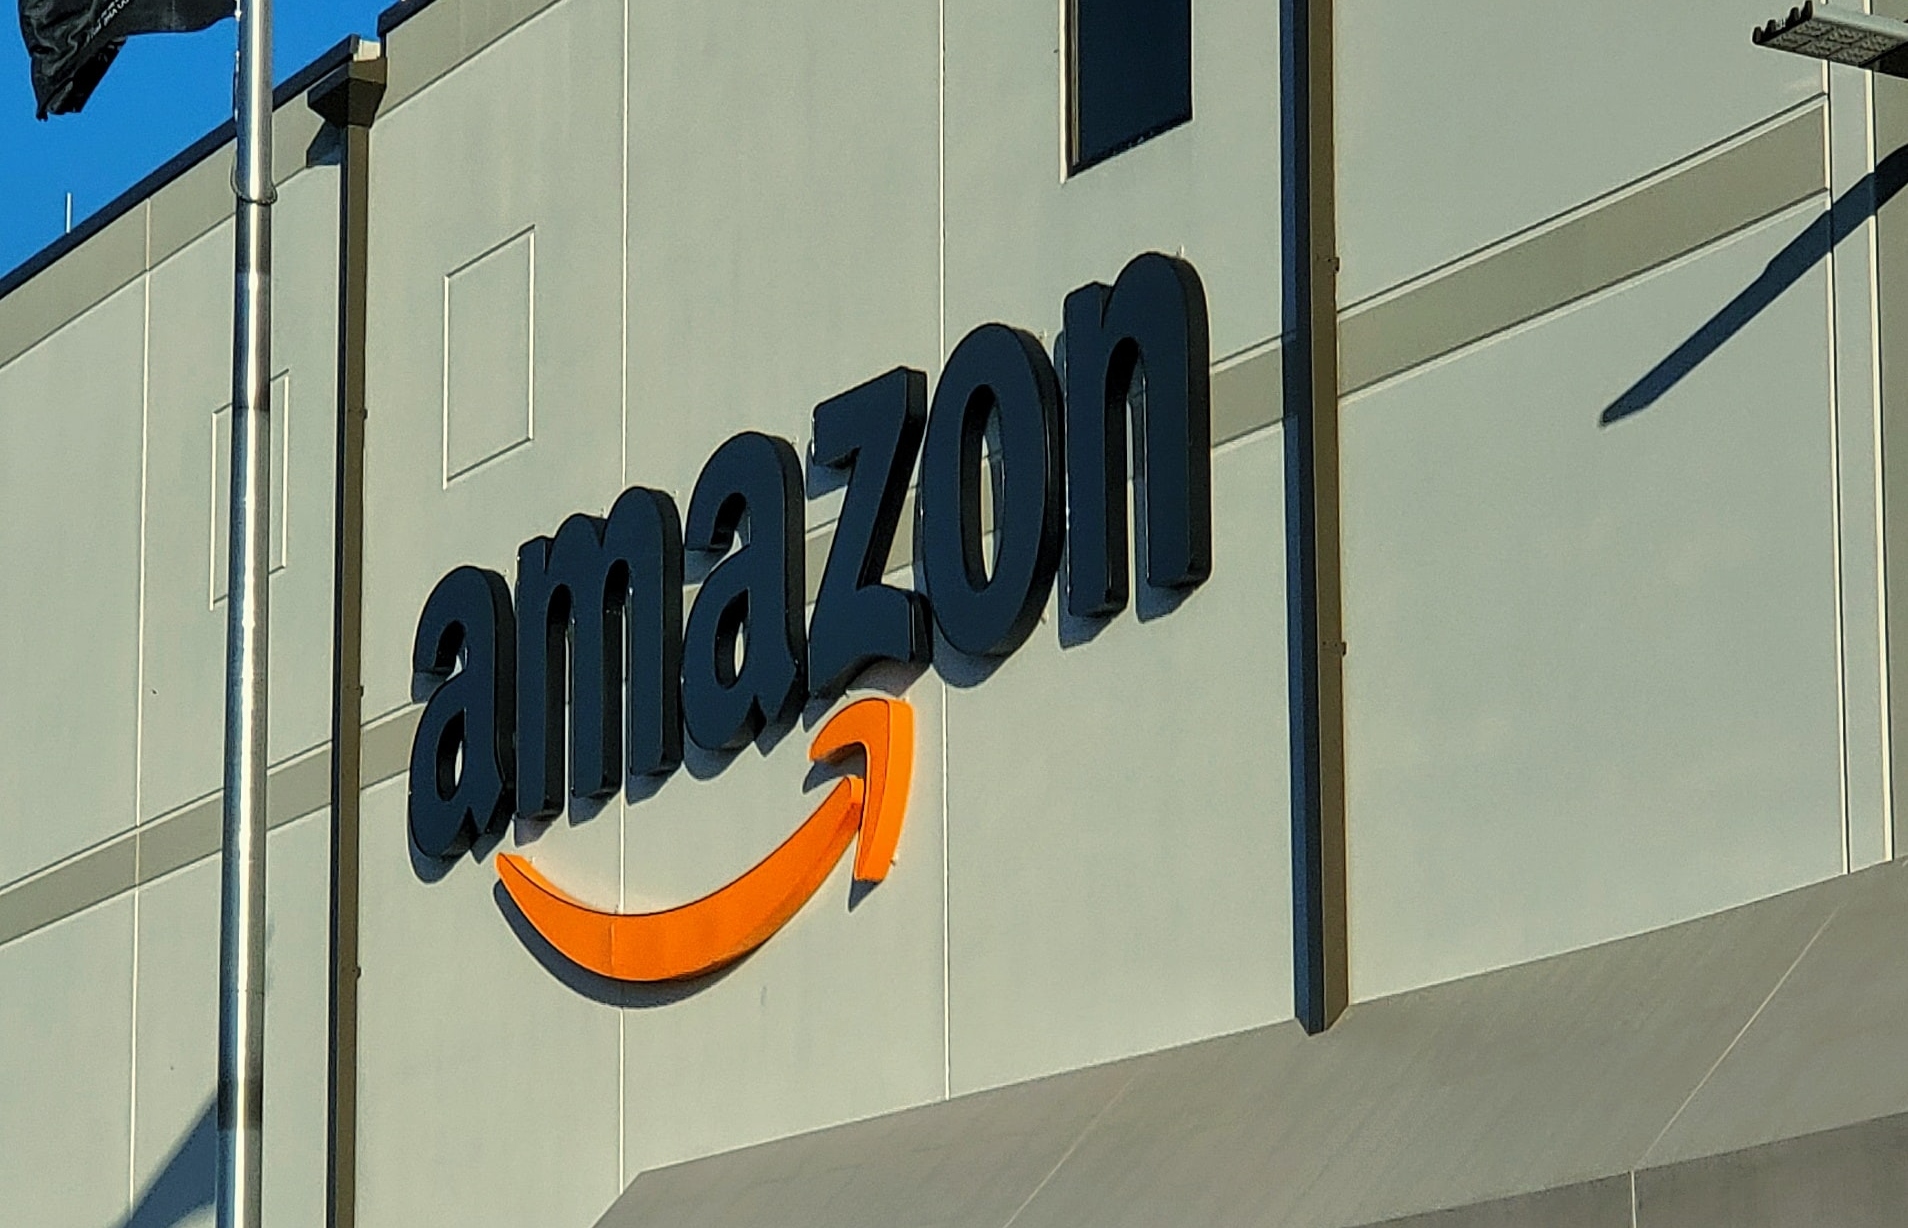 Amazon Job Cuts Due to Economic Uncertainty to Exceed 18k